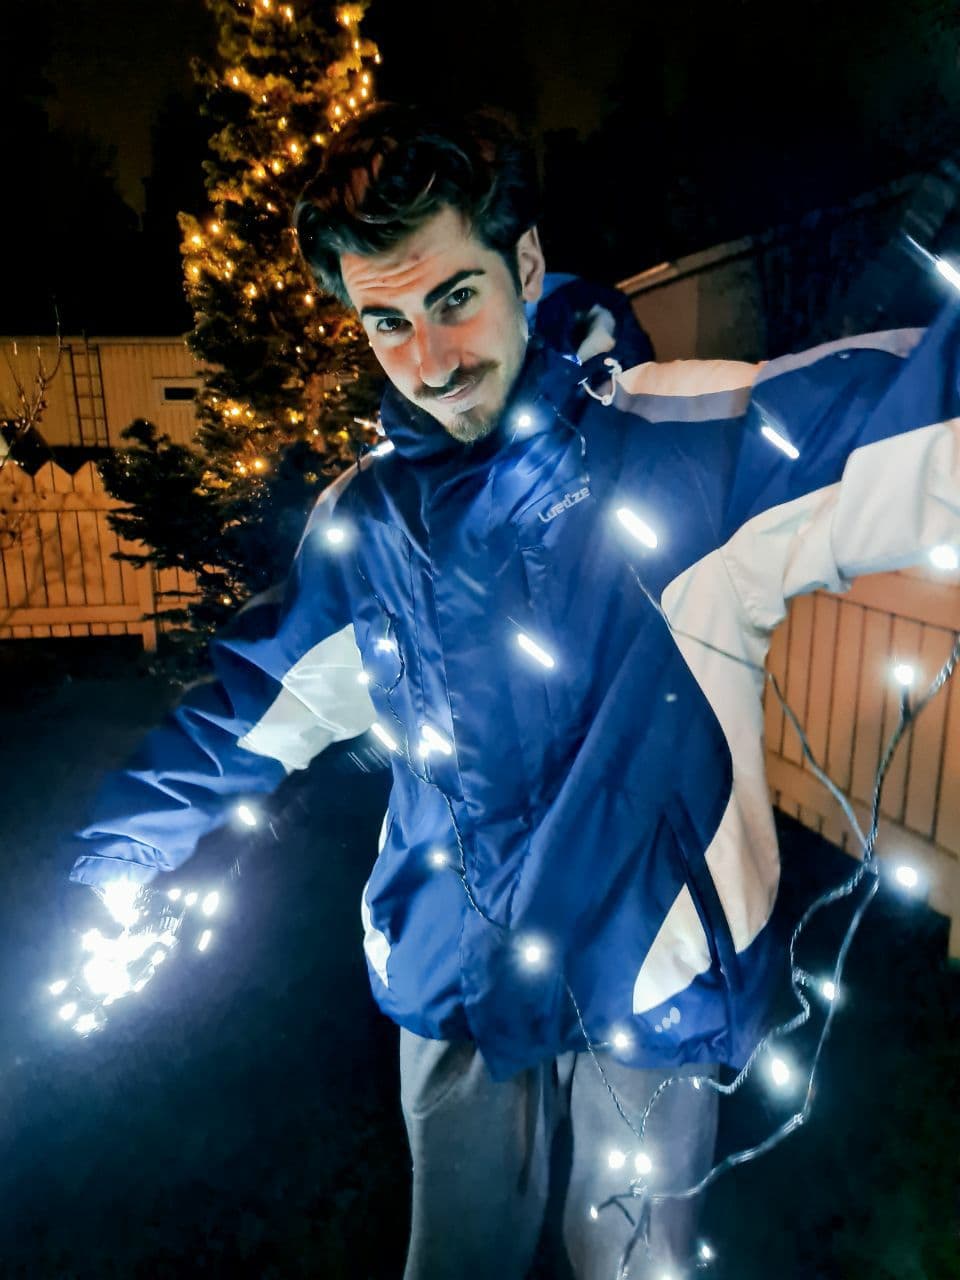 Clockwork in a blue winter jacket holding Christmas lights in a garden by night